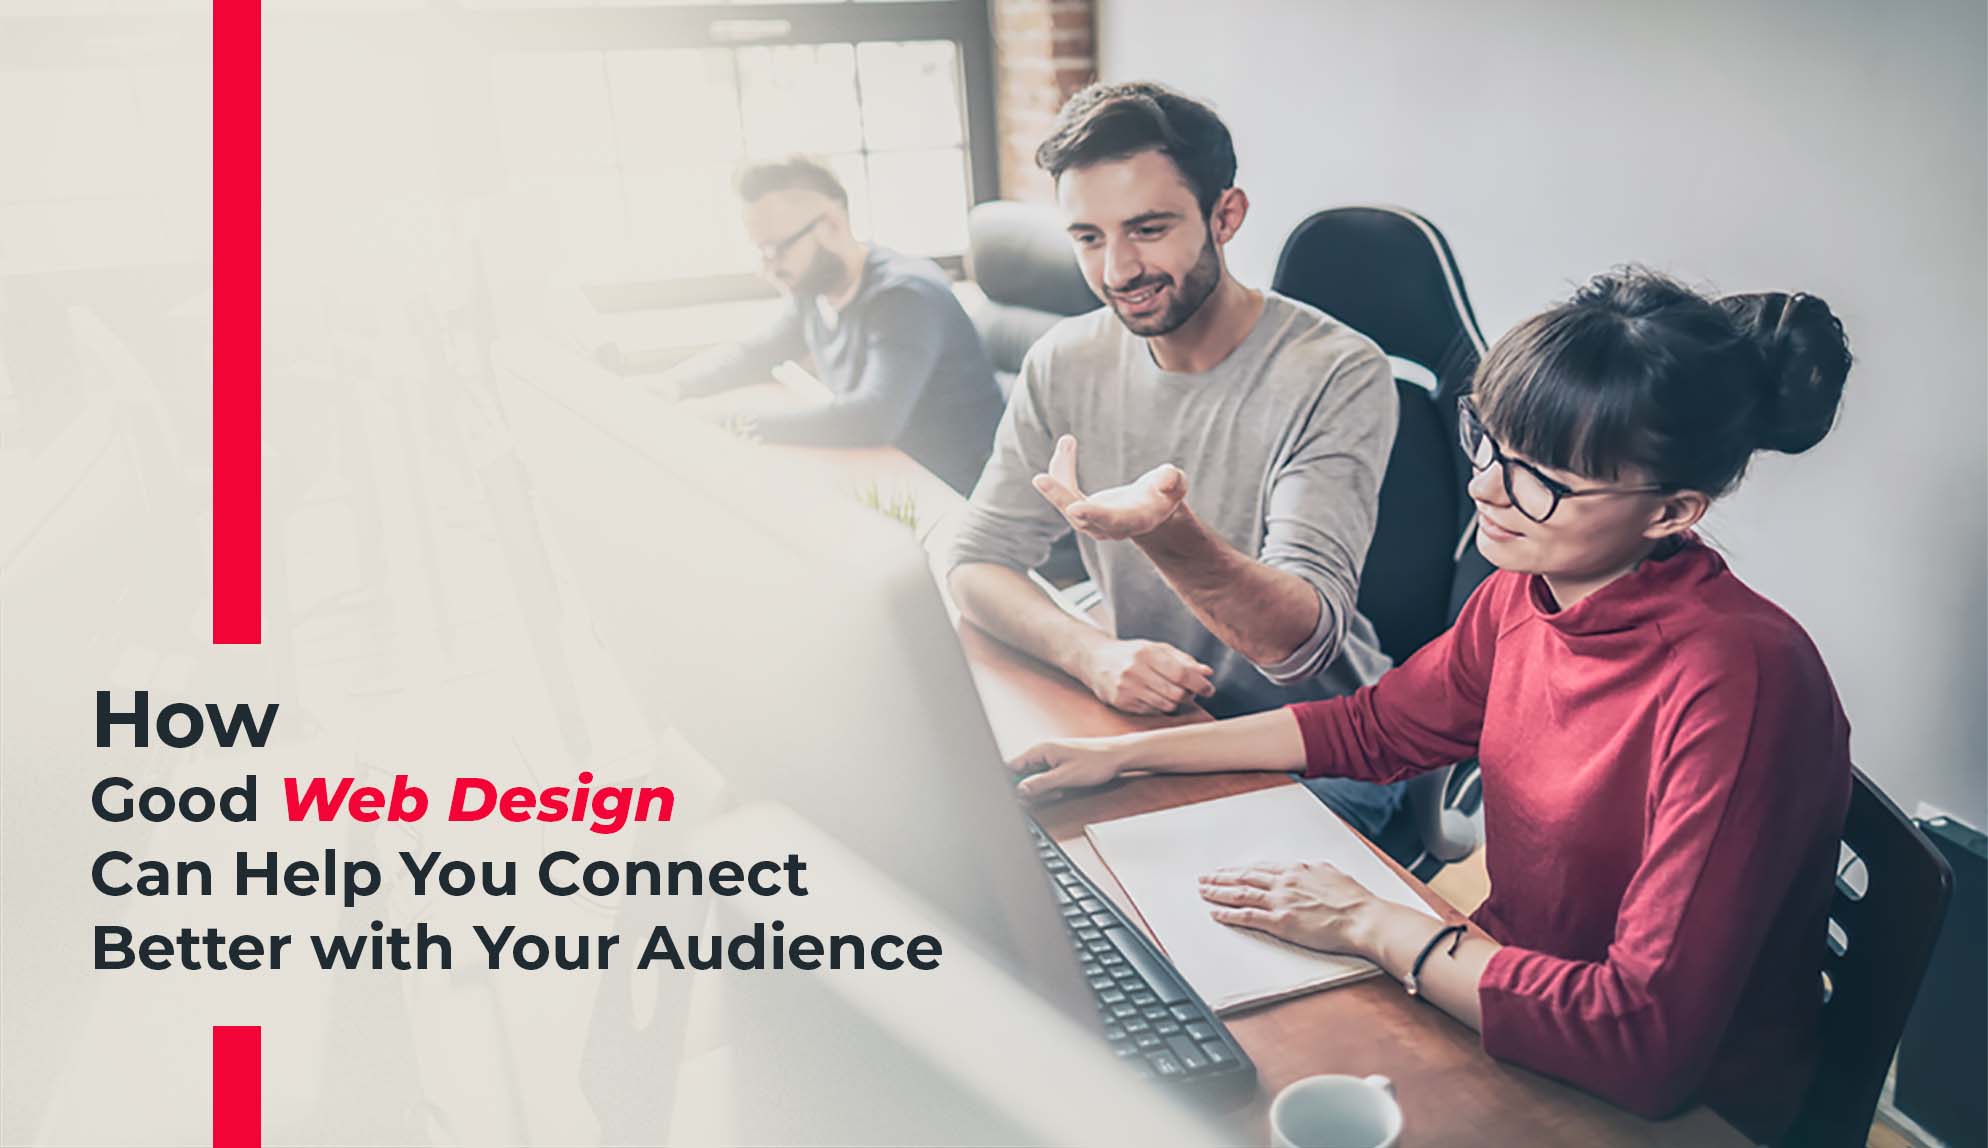 How Good Web Design Can Help You Connect Better with Your Audience